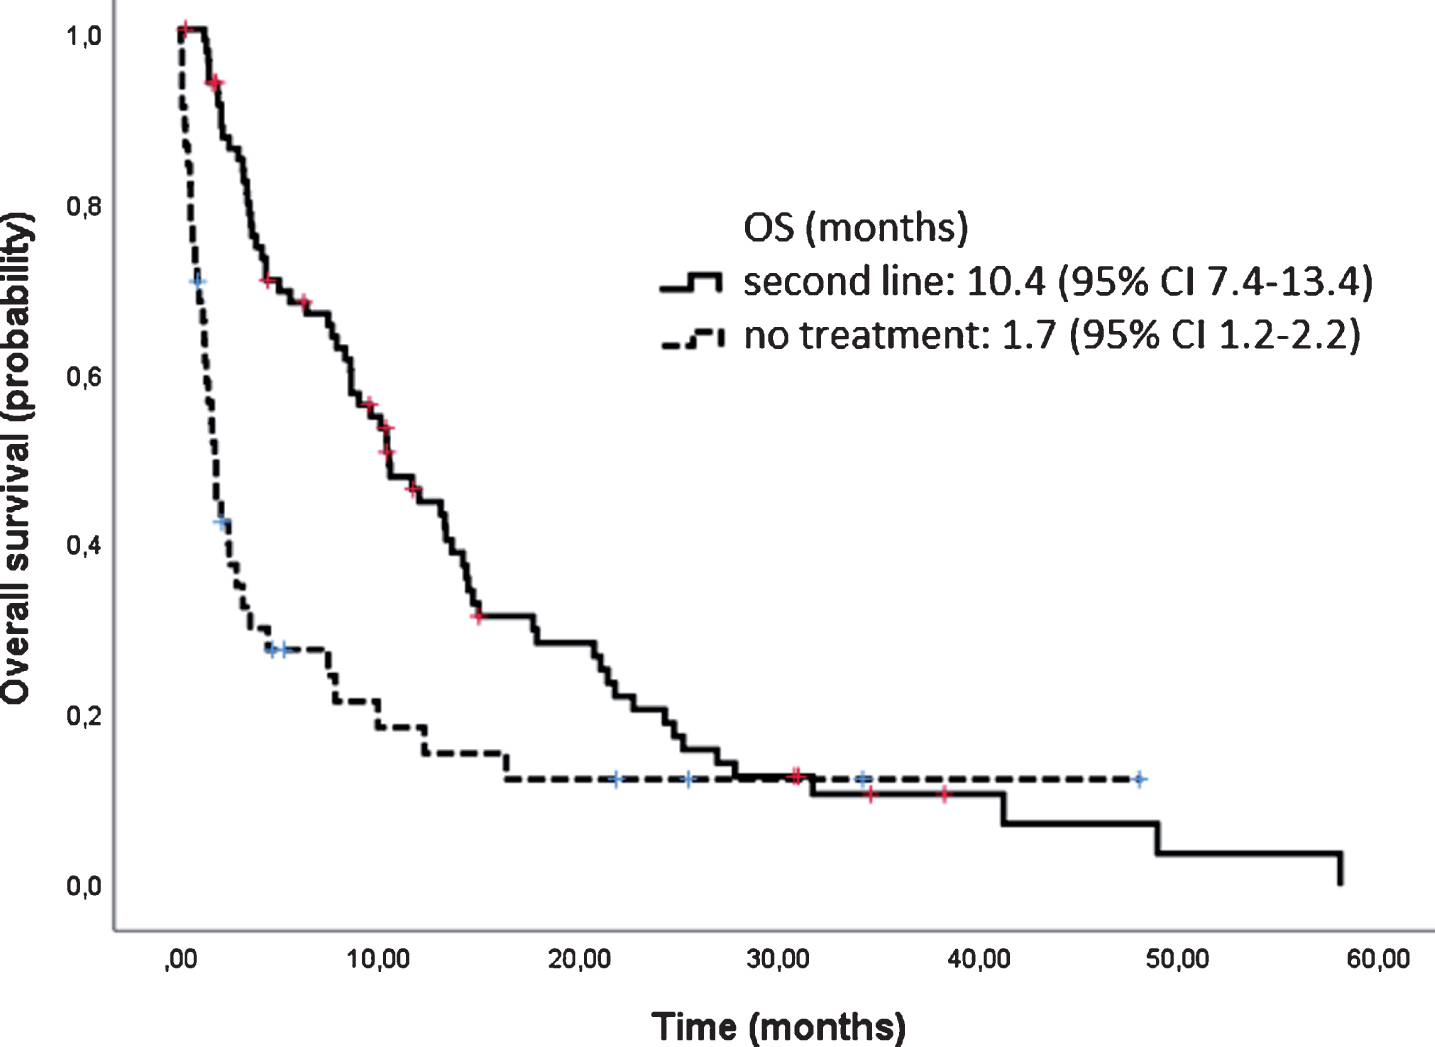 Overall survival of second line treatment versus no treatment.